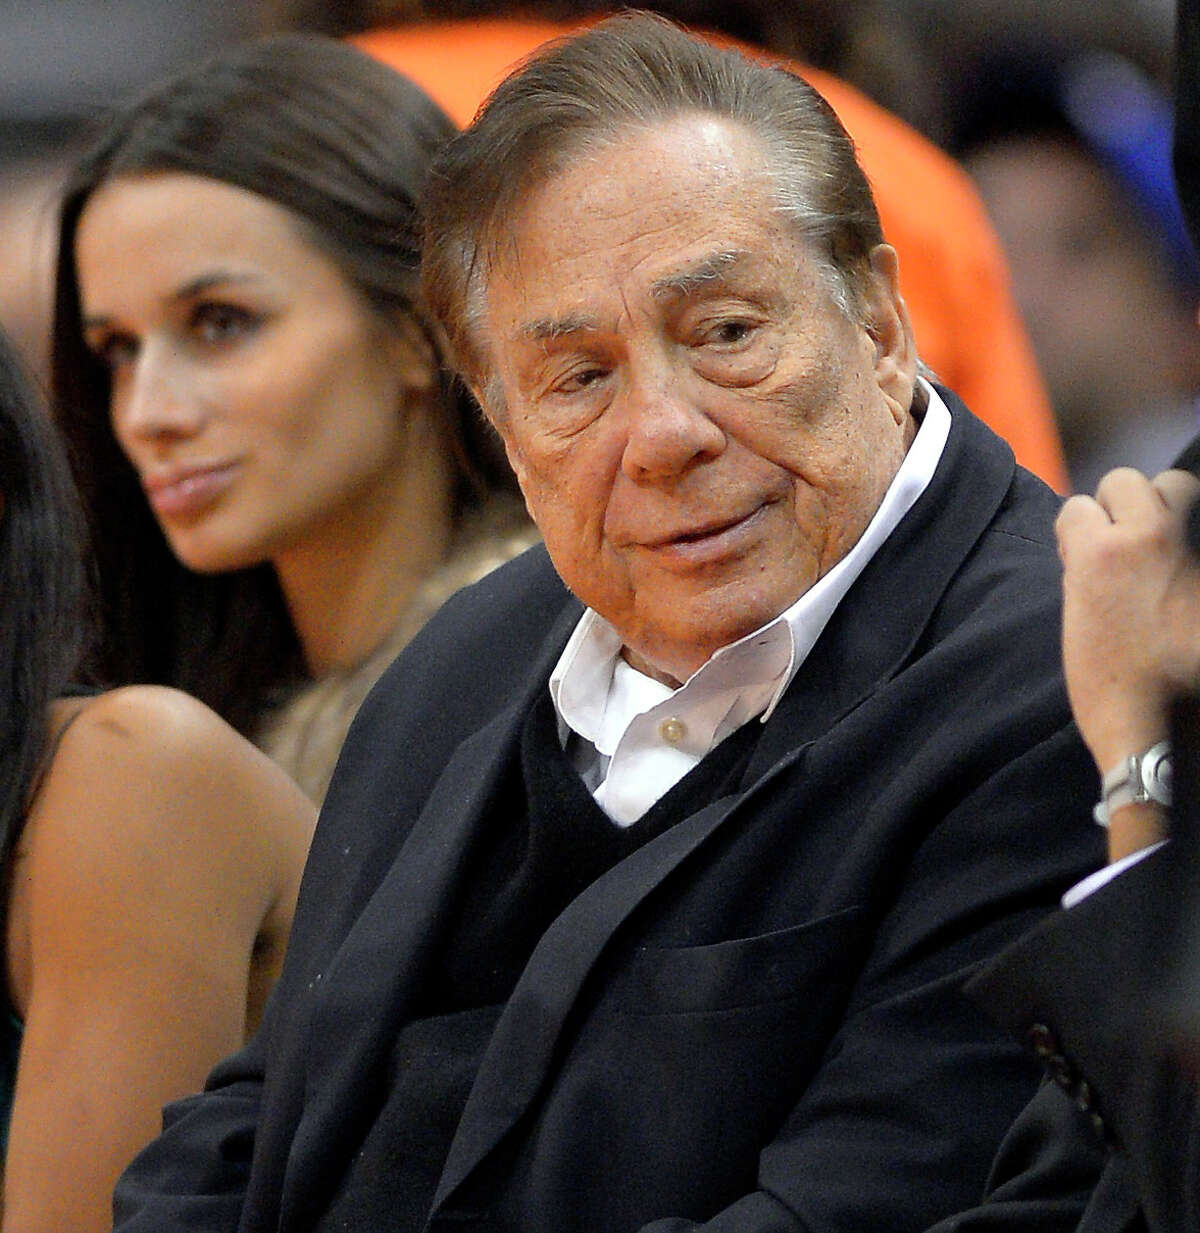 FILE - In this Oct. 25, 2013, file photo, Los Angeles Clippers owner Donald Sterling attends a Clippers game against the Sacramento Kings in Los Angeles. With the potentially record-breaking $2 billion sale of the Los Angeles Clippers hanging in the balance, a trial beginning Monday, July 7, 2014 will focus on whether Donald Sterling's estranged wife had the authority under terms of a family trust to unilaterally negotiate the deal. (AP Photo/Mark J. Terrill, File)